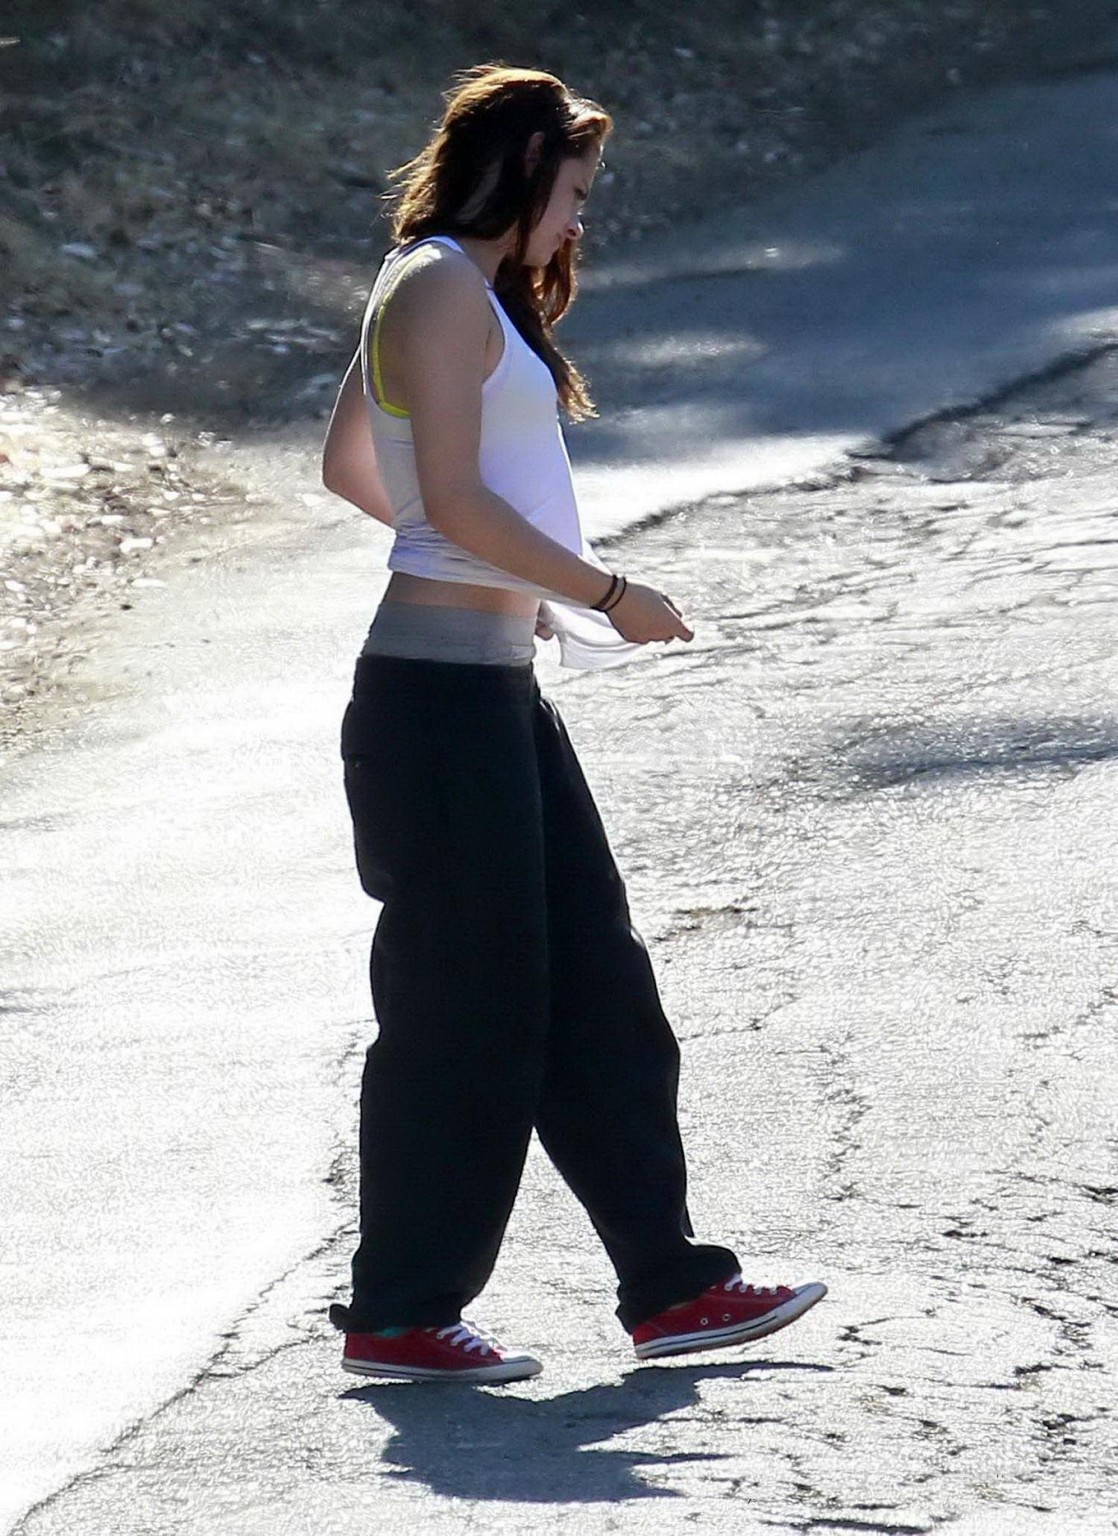 Kristen Stewart getting groped  dry humped on the side of the road #75256334